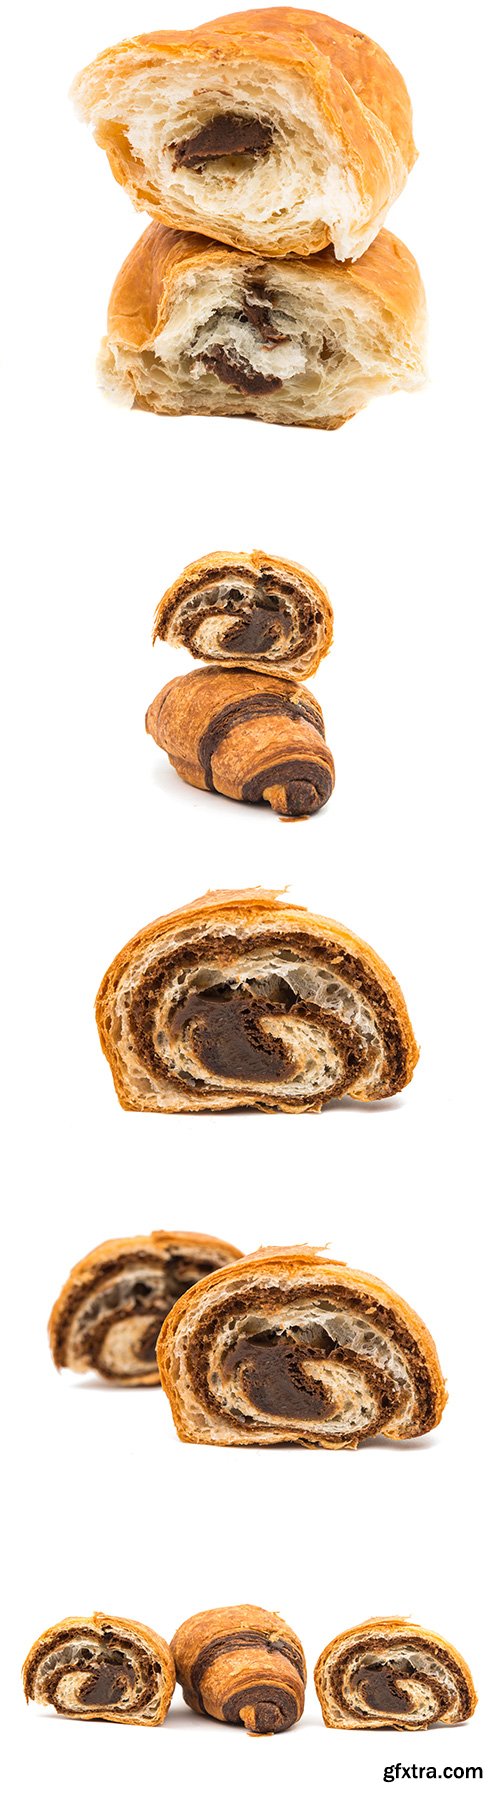 Chocolate Croissant Isolated - 10xJPGs